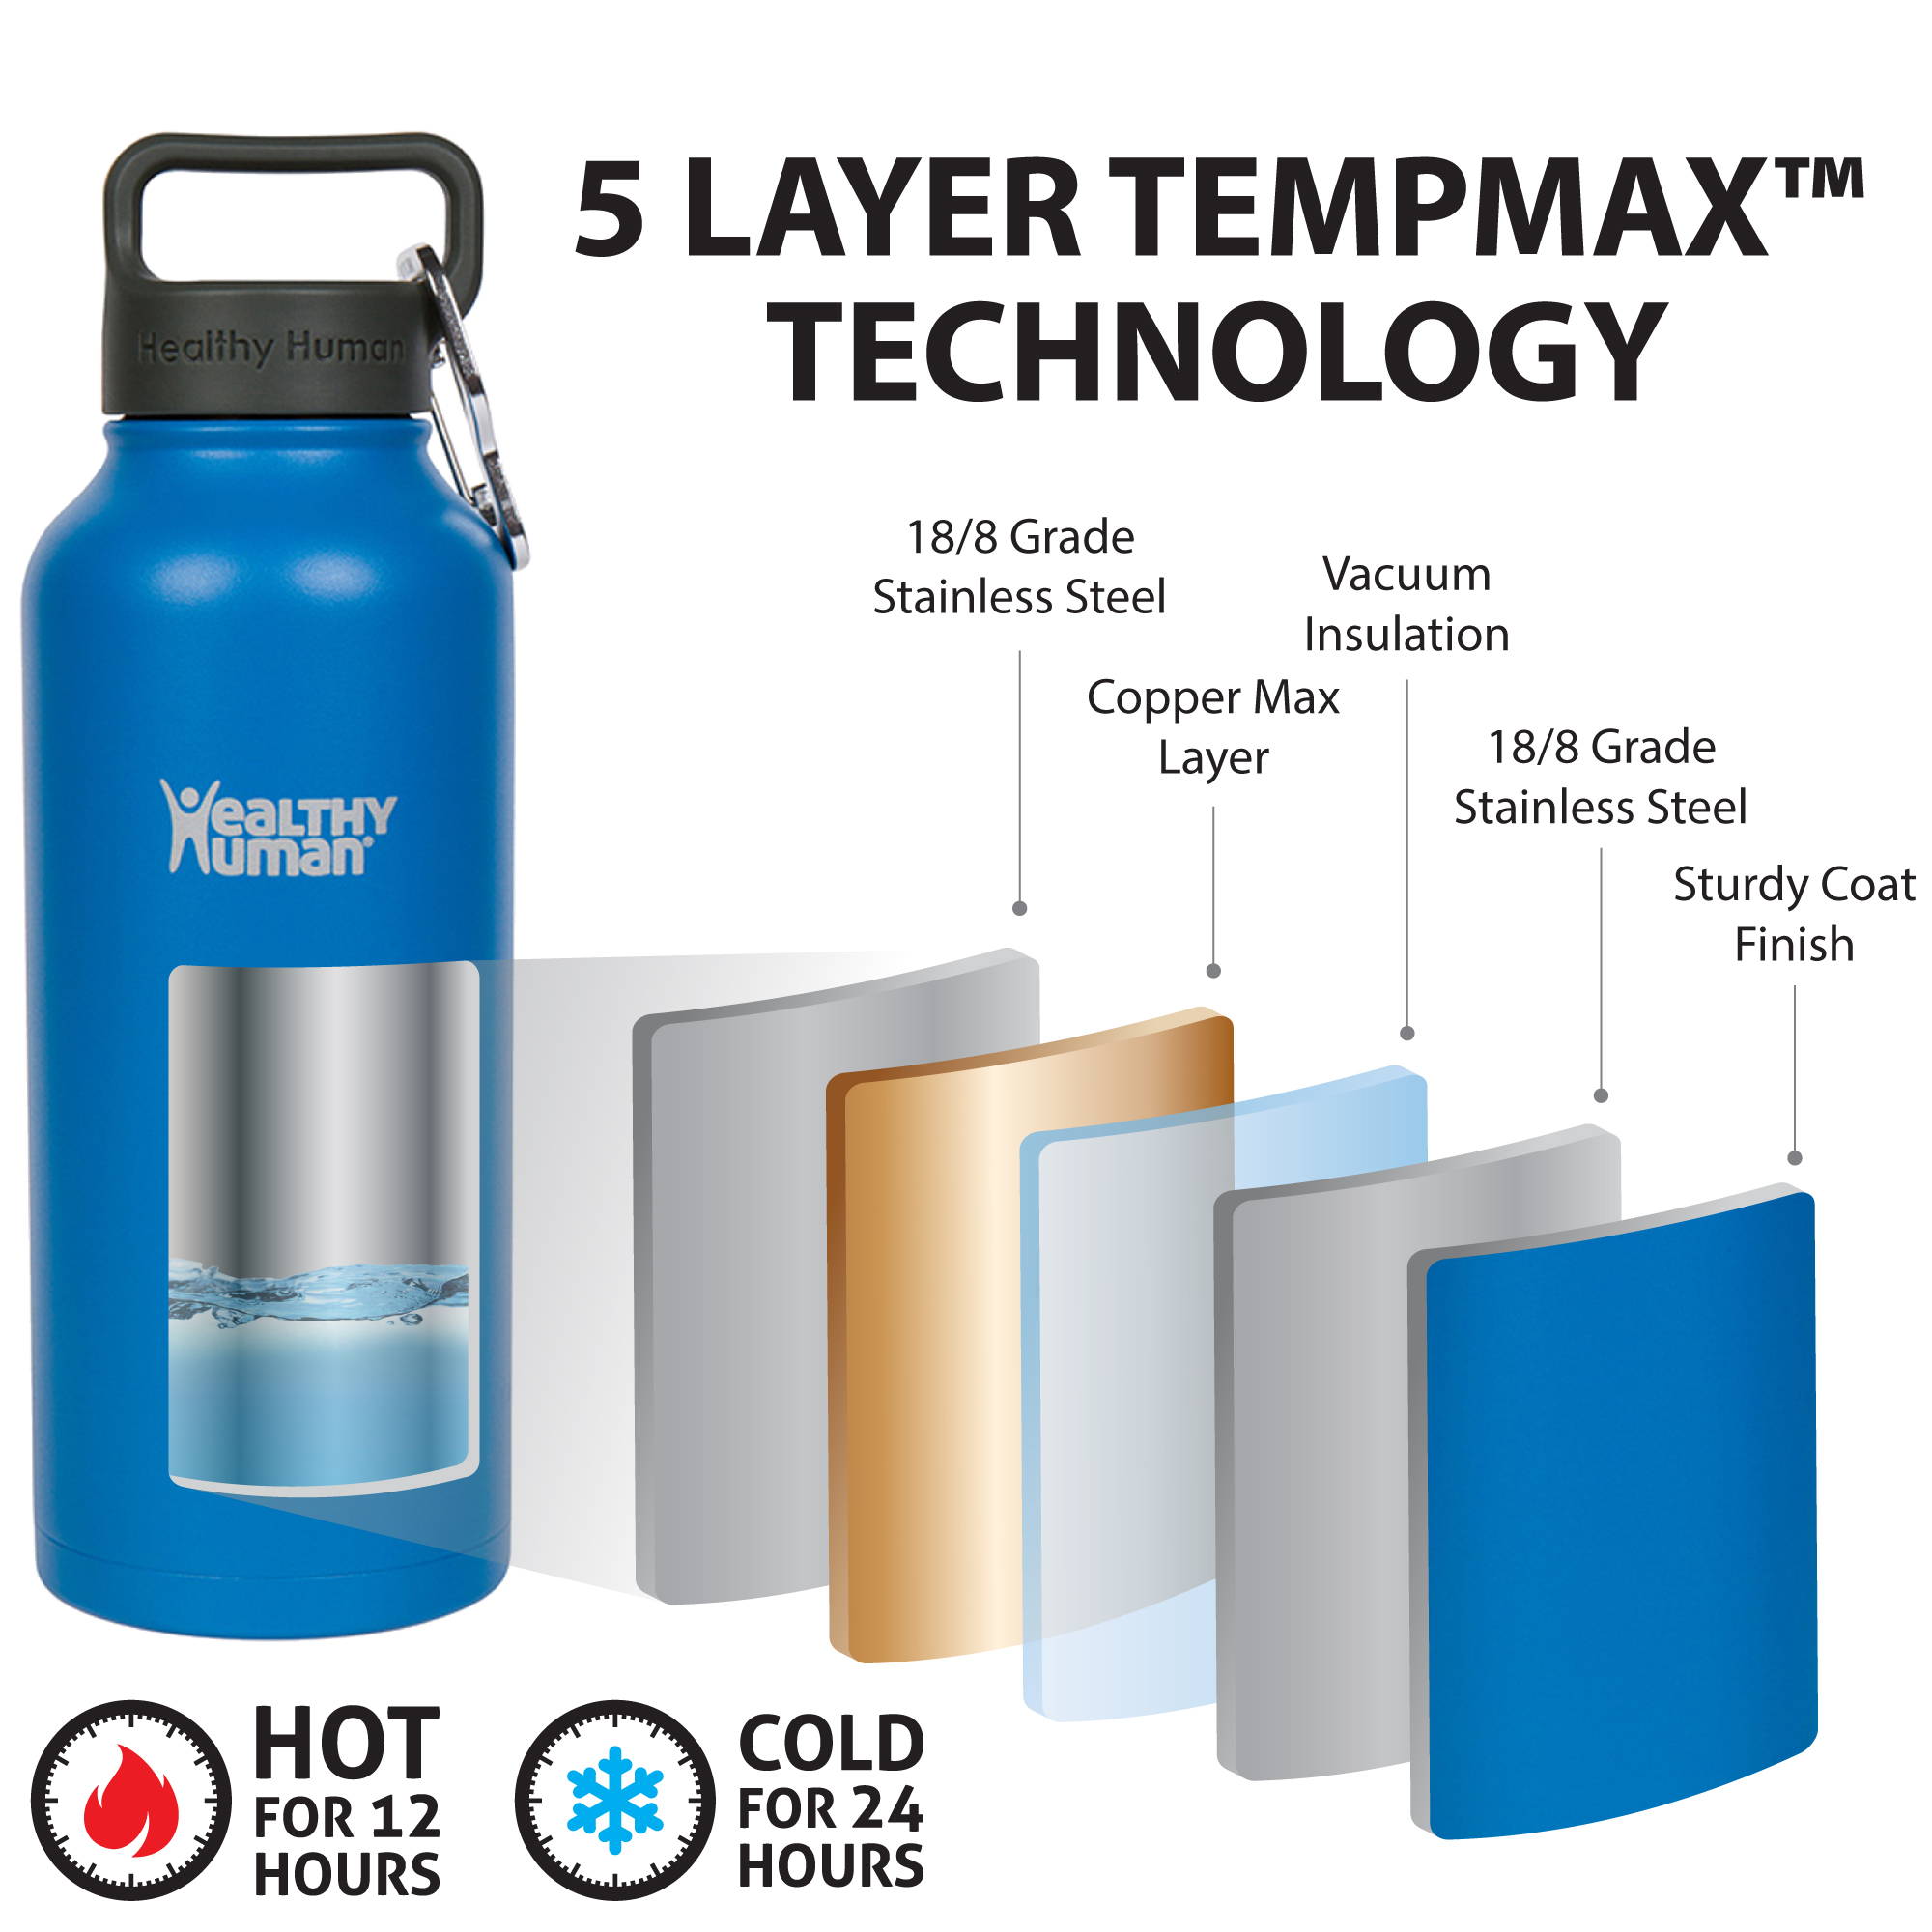 Layer Tempmax Technology